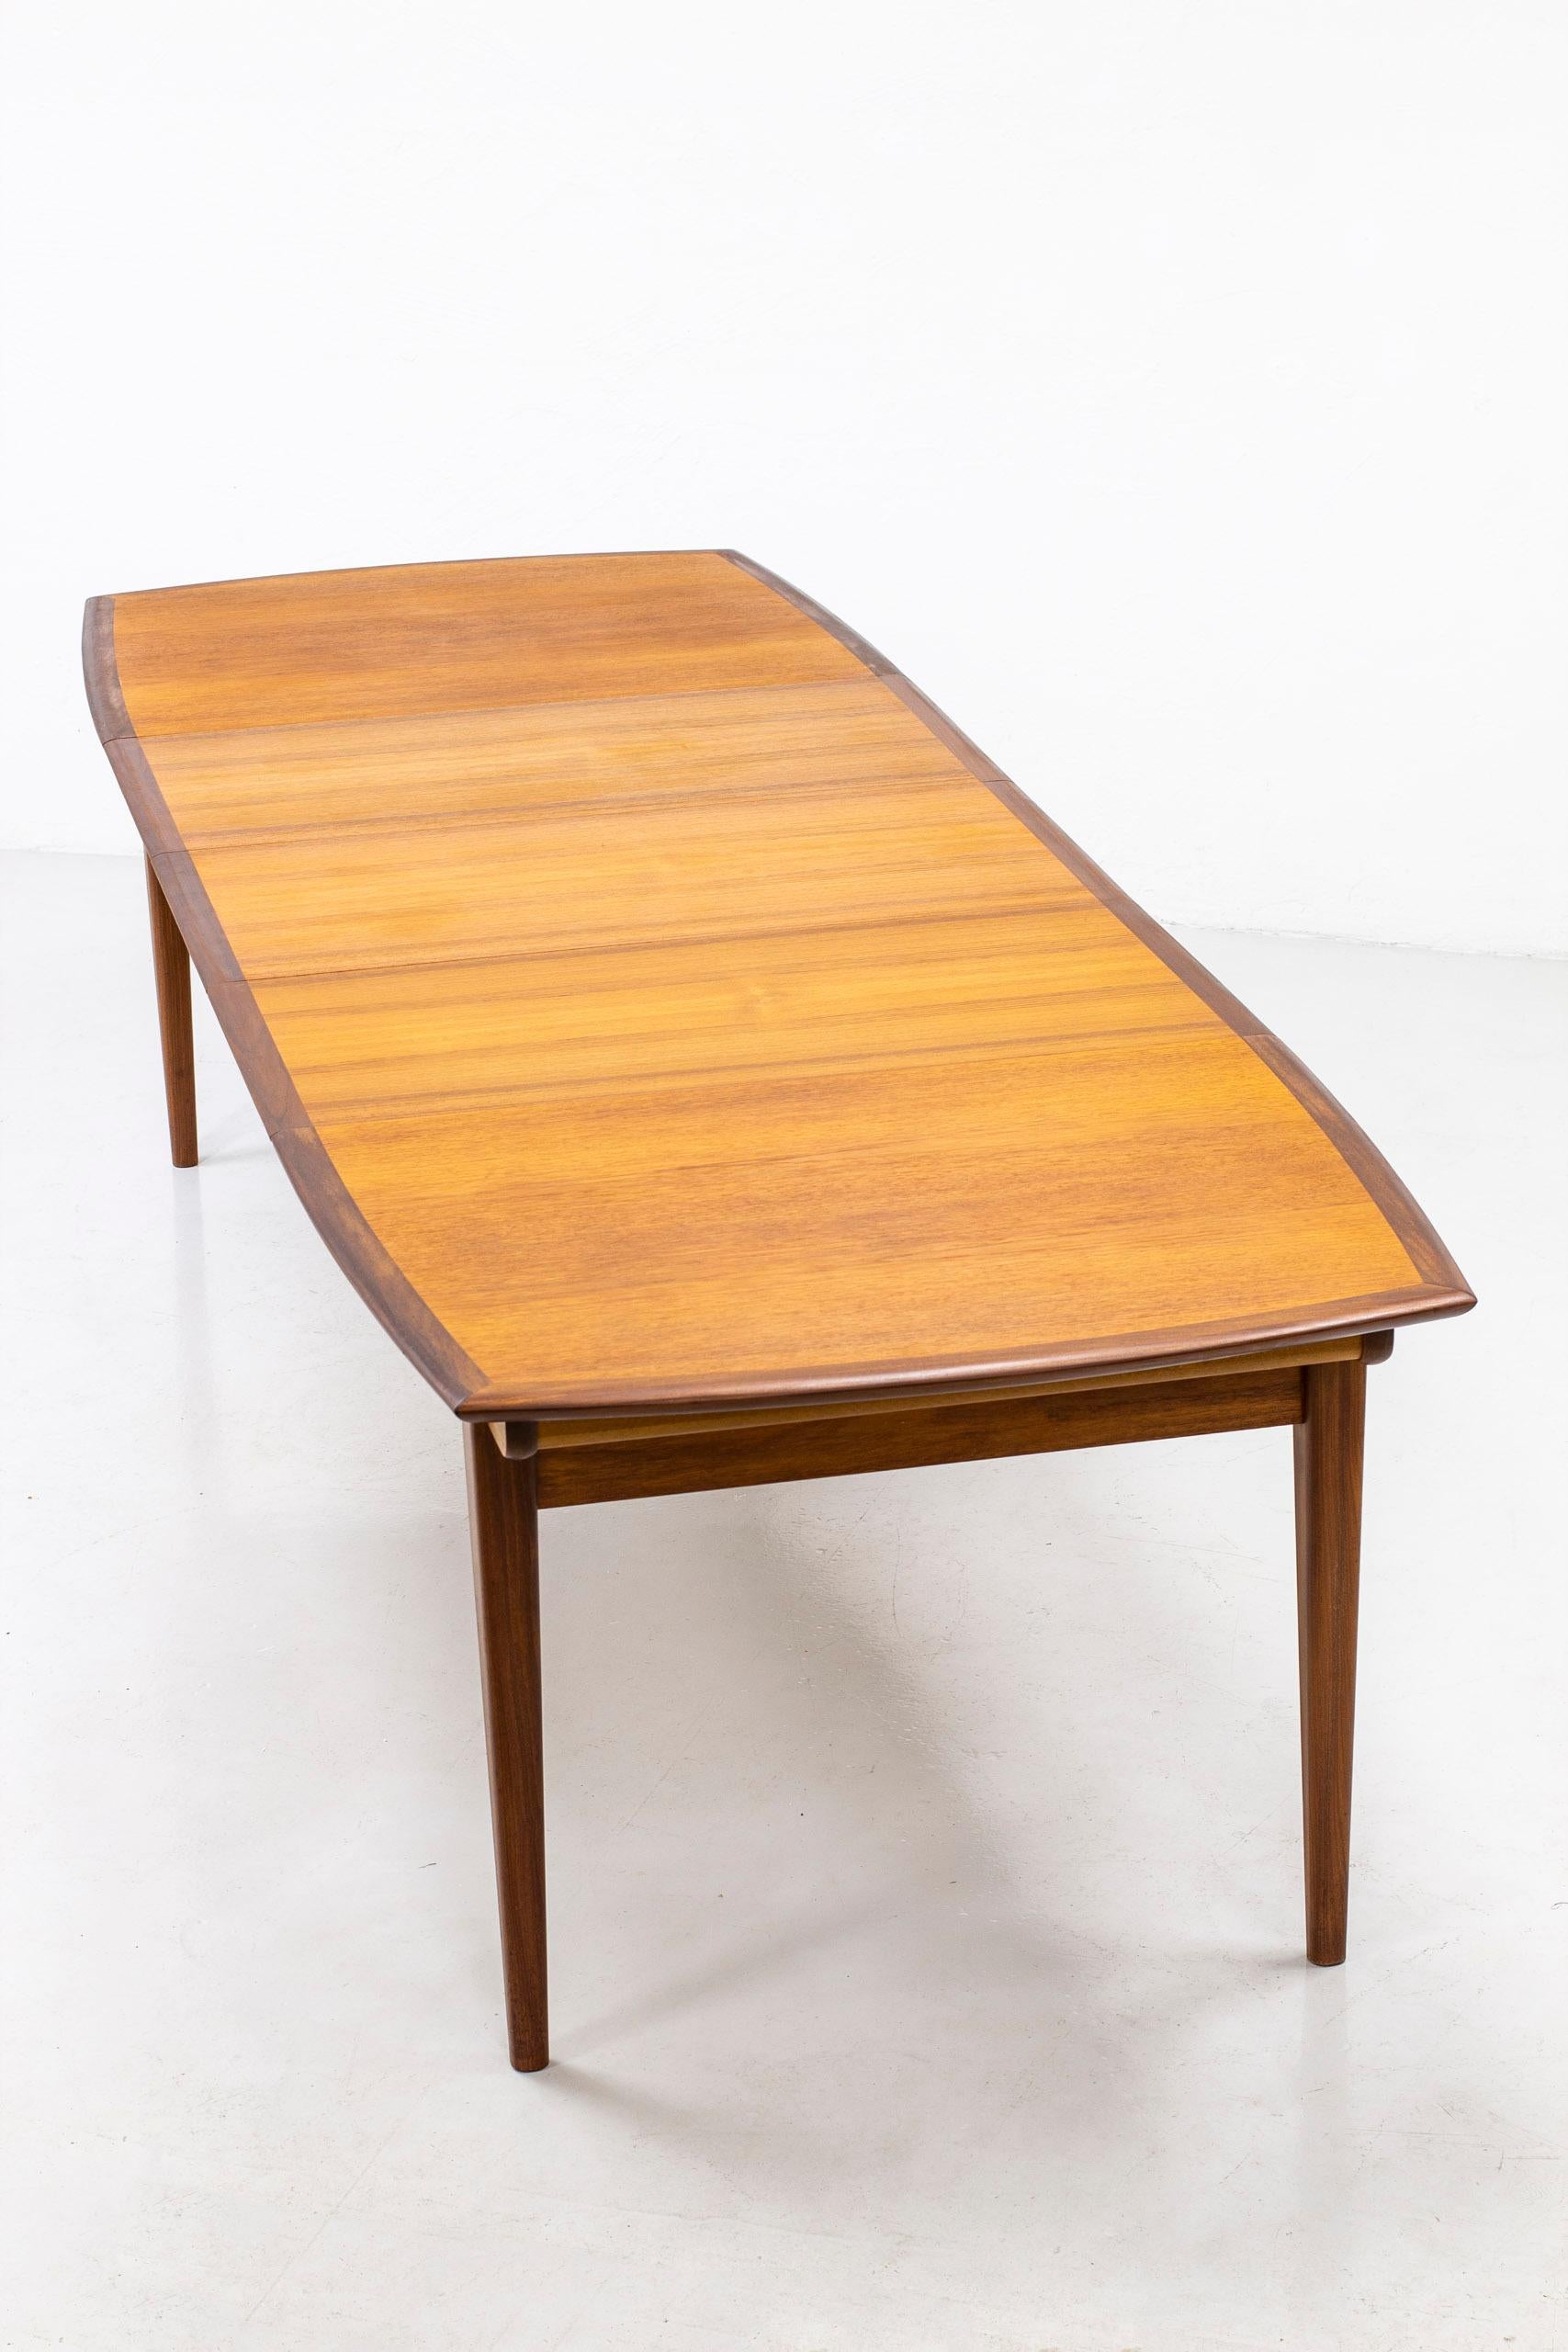 Dining table produced by Gustav Bahus in Norway during the 1950s. Legs and edge in solid walnut and leaves of teak wood. Slightly curved shape with rounded edge. Sits ten-twelve people comfortably. Very good vintage condition with light age related